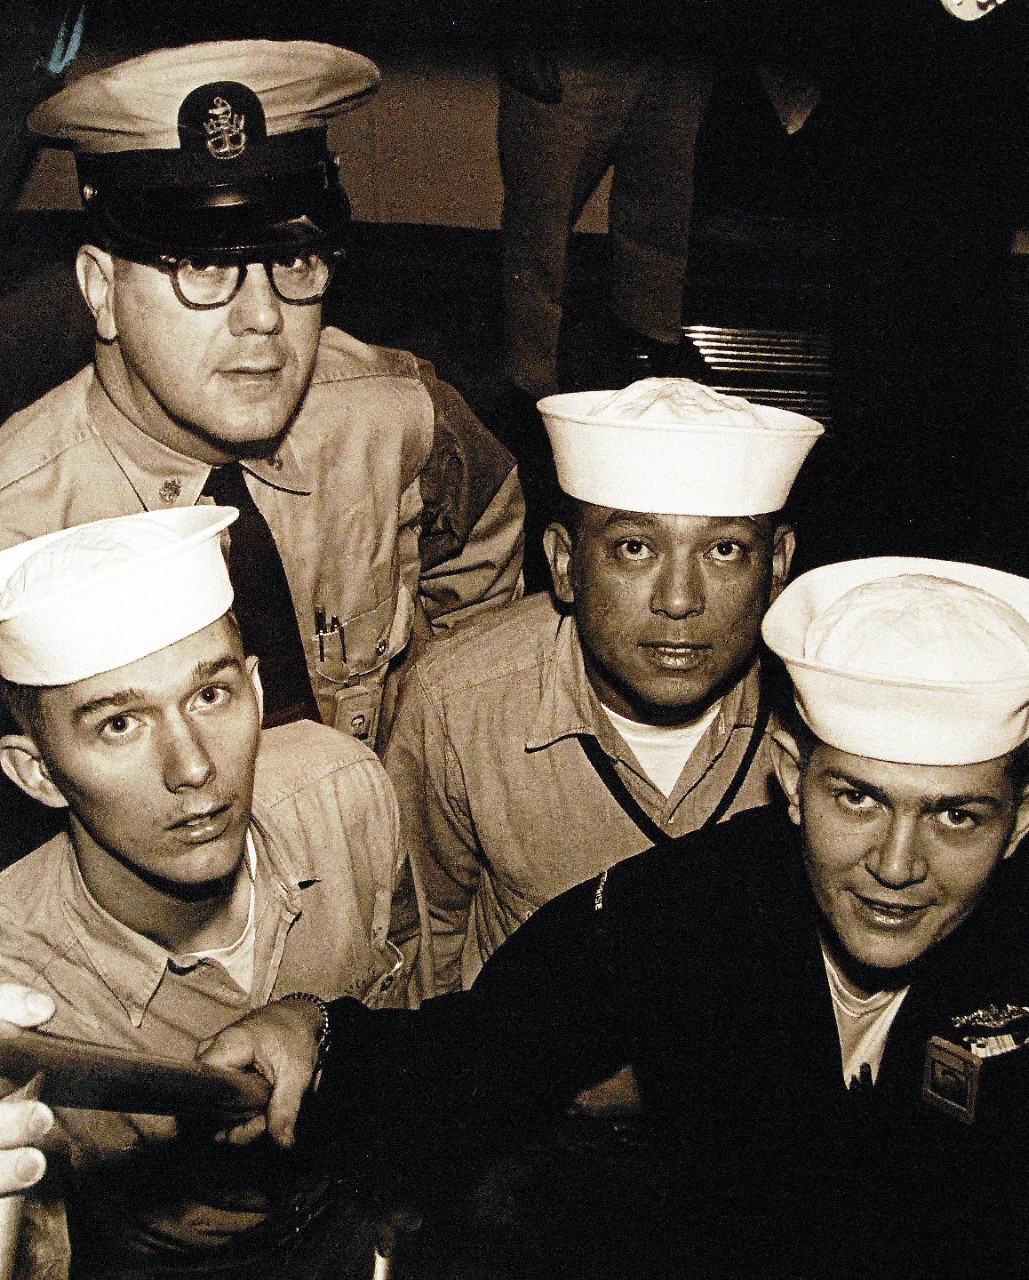 330-PSA-208-64 (USN 1105502):  Operation Sea Orbit, 1964.   The Navy men who had relatives aboard ships in the Great White Fleet, 1907-09, are, (left to right):  Aerographer’s Mate Third Class William C. Longstreet, USN, whose grandfather made the cruise in 1907; Chief Electrician’s Mate J.E. Norton, USN, whose uncle Joseph Starr was a Quartermaster with the Great White Fleet; Boatswain’s Mate Third Class Henry Lopez, who had an uncle, Eddie Romers, in the Great White Fleet, and Fireman William C. Stock, whose father sailed with the 16 battleships on their history making voyage.   Master caption:  Thee four sailors were aboard the nuclear powered aircraft carrier, USS Enterprise (CVAN-65), now nearing the end of 1 33,000 mile world cruise, have been following in the wake of relatives who circled the globe with the Great White Fleet more than 50 years ago.  Task Force One, composed of USS Enterprise (CVAN-65); USS Long Beach (CLGN-9), and USS Bainbridge (DLGN-25), left the Mediterranean July 31 and are scheduled to arrive in Norfolk, Virginia, October 3, after visitng ports in Africa, the Middle East, New Zealand, Australia, and South America.  Photograph released September 1964.  Official U.S. Navy Photograph, now in the collections of the National Archives.   (2015/11/03).